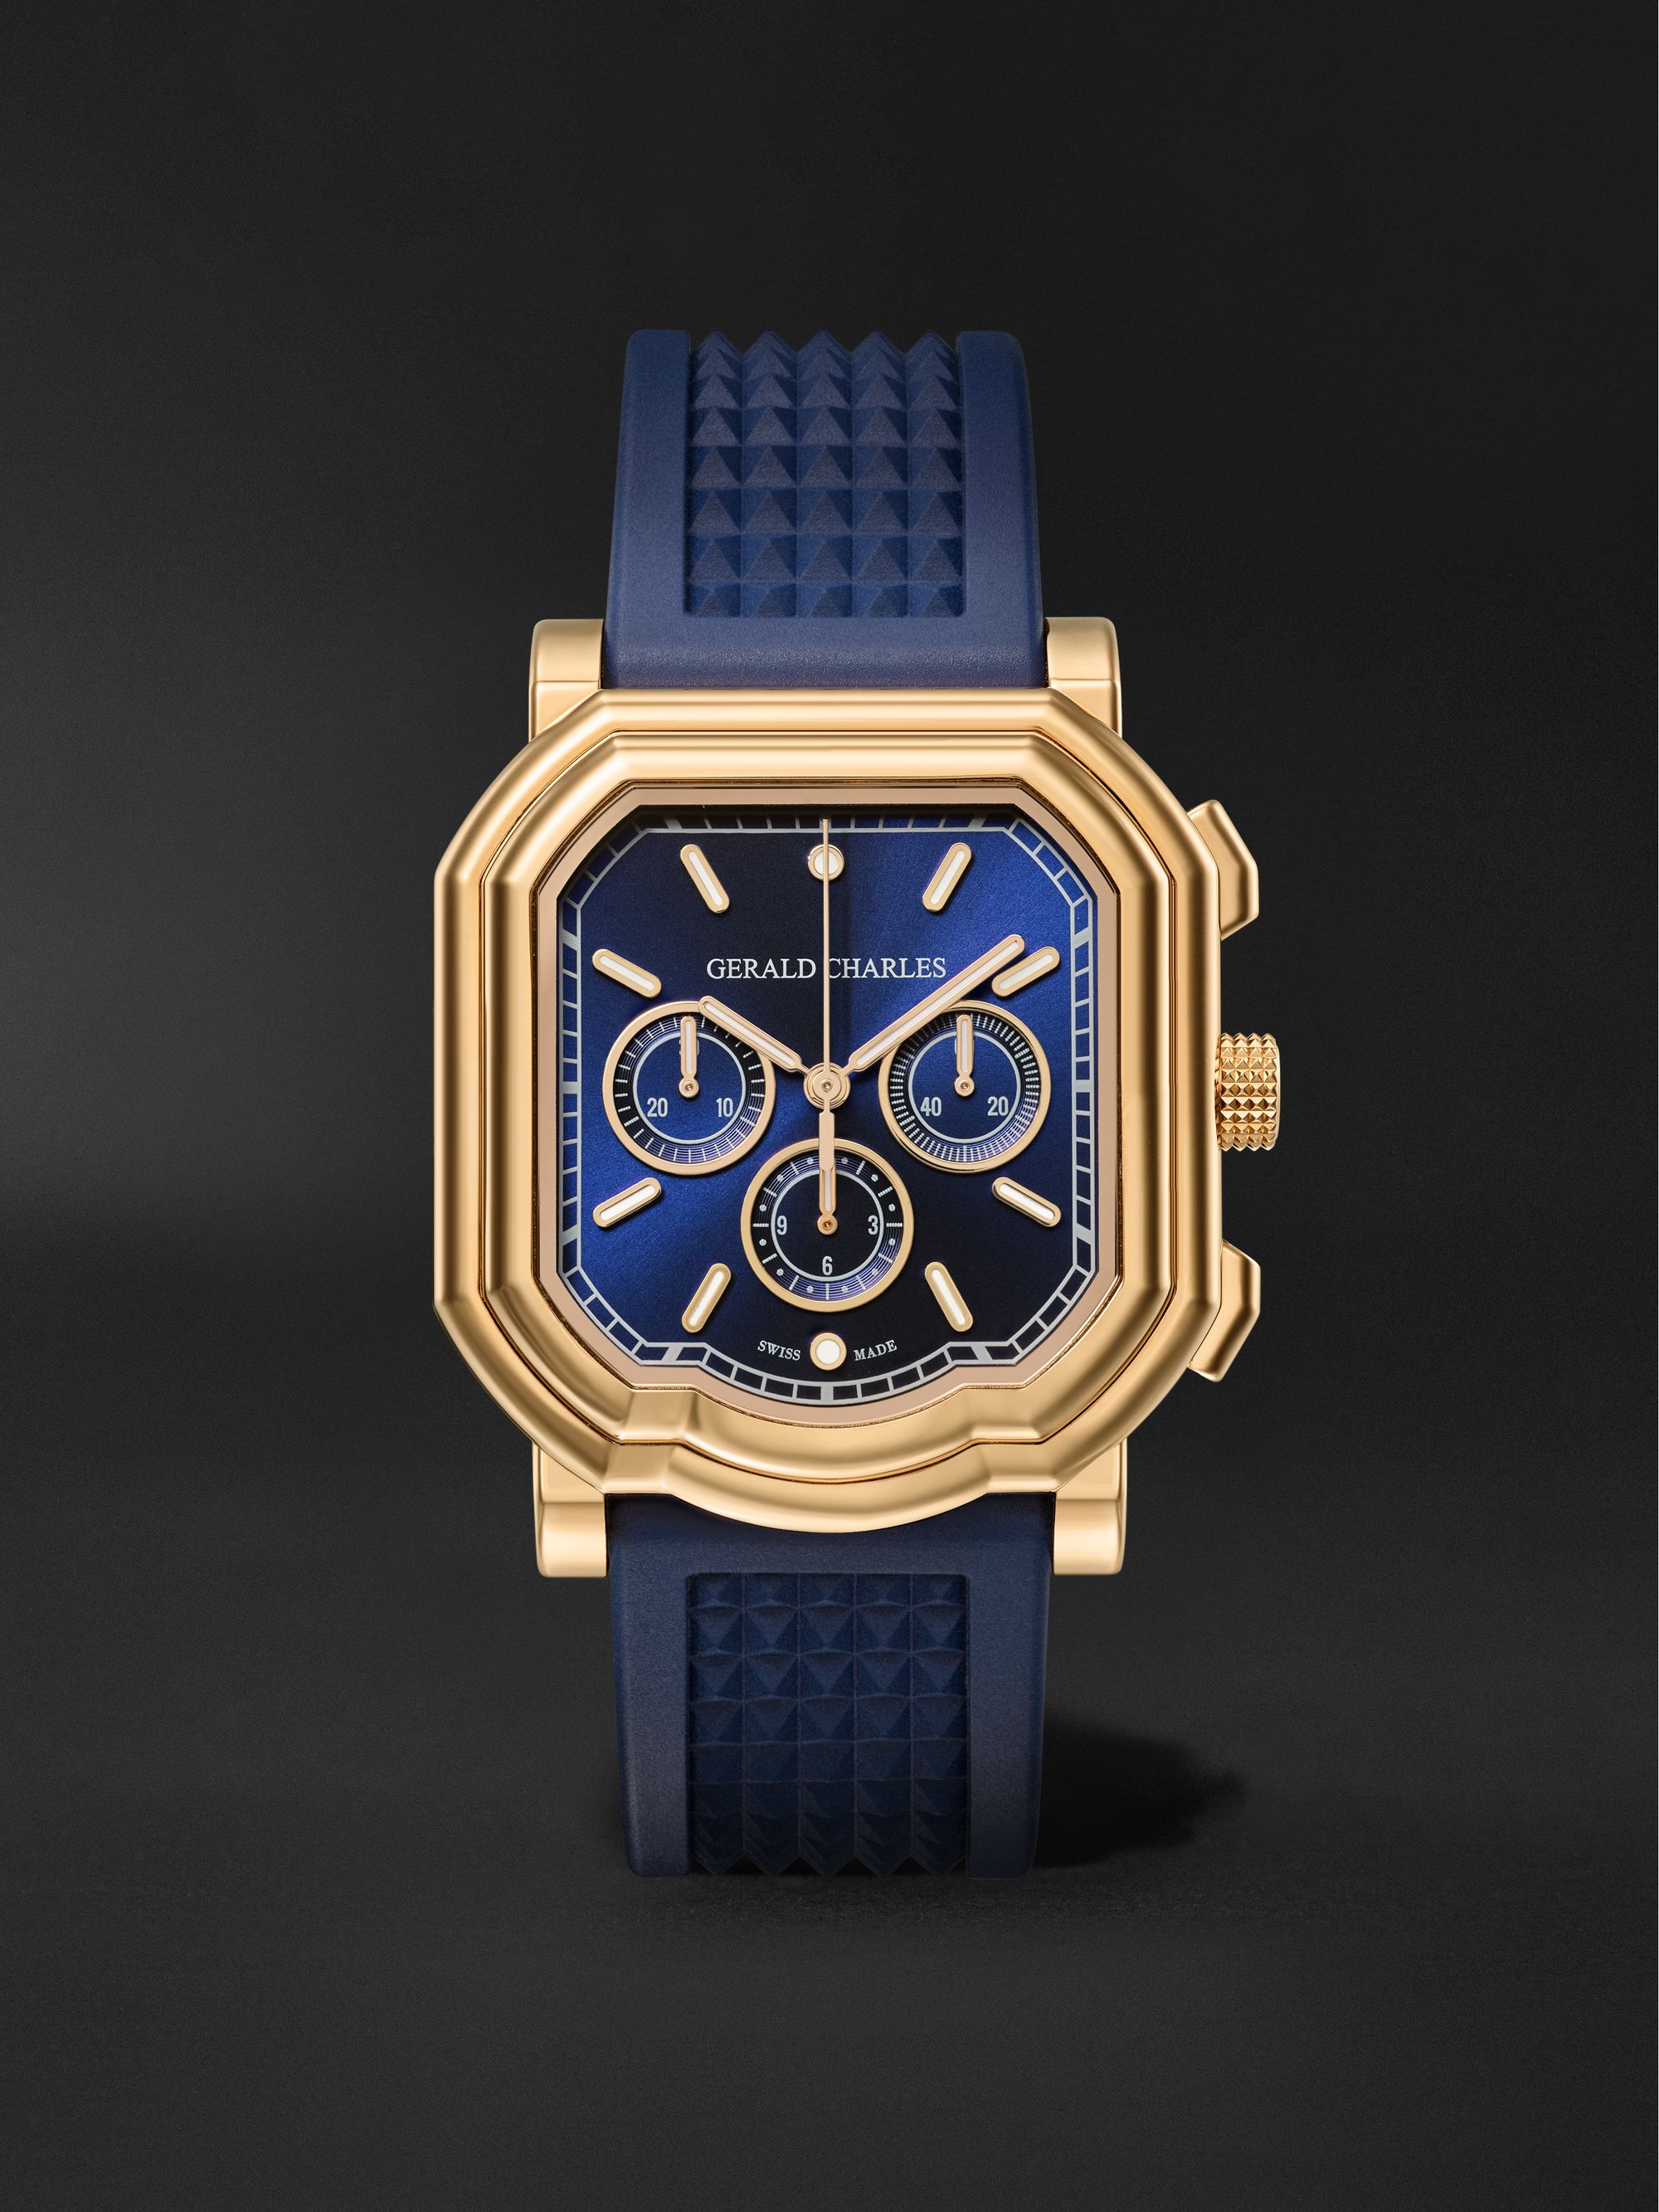 GERALD CHARLES Maestro 3.0 Automatic Chronograph 28mm 18-Karat Rose Gold and Rubber Watch, Ref. No. GC3.0-RG-01